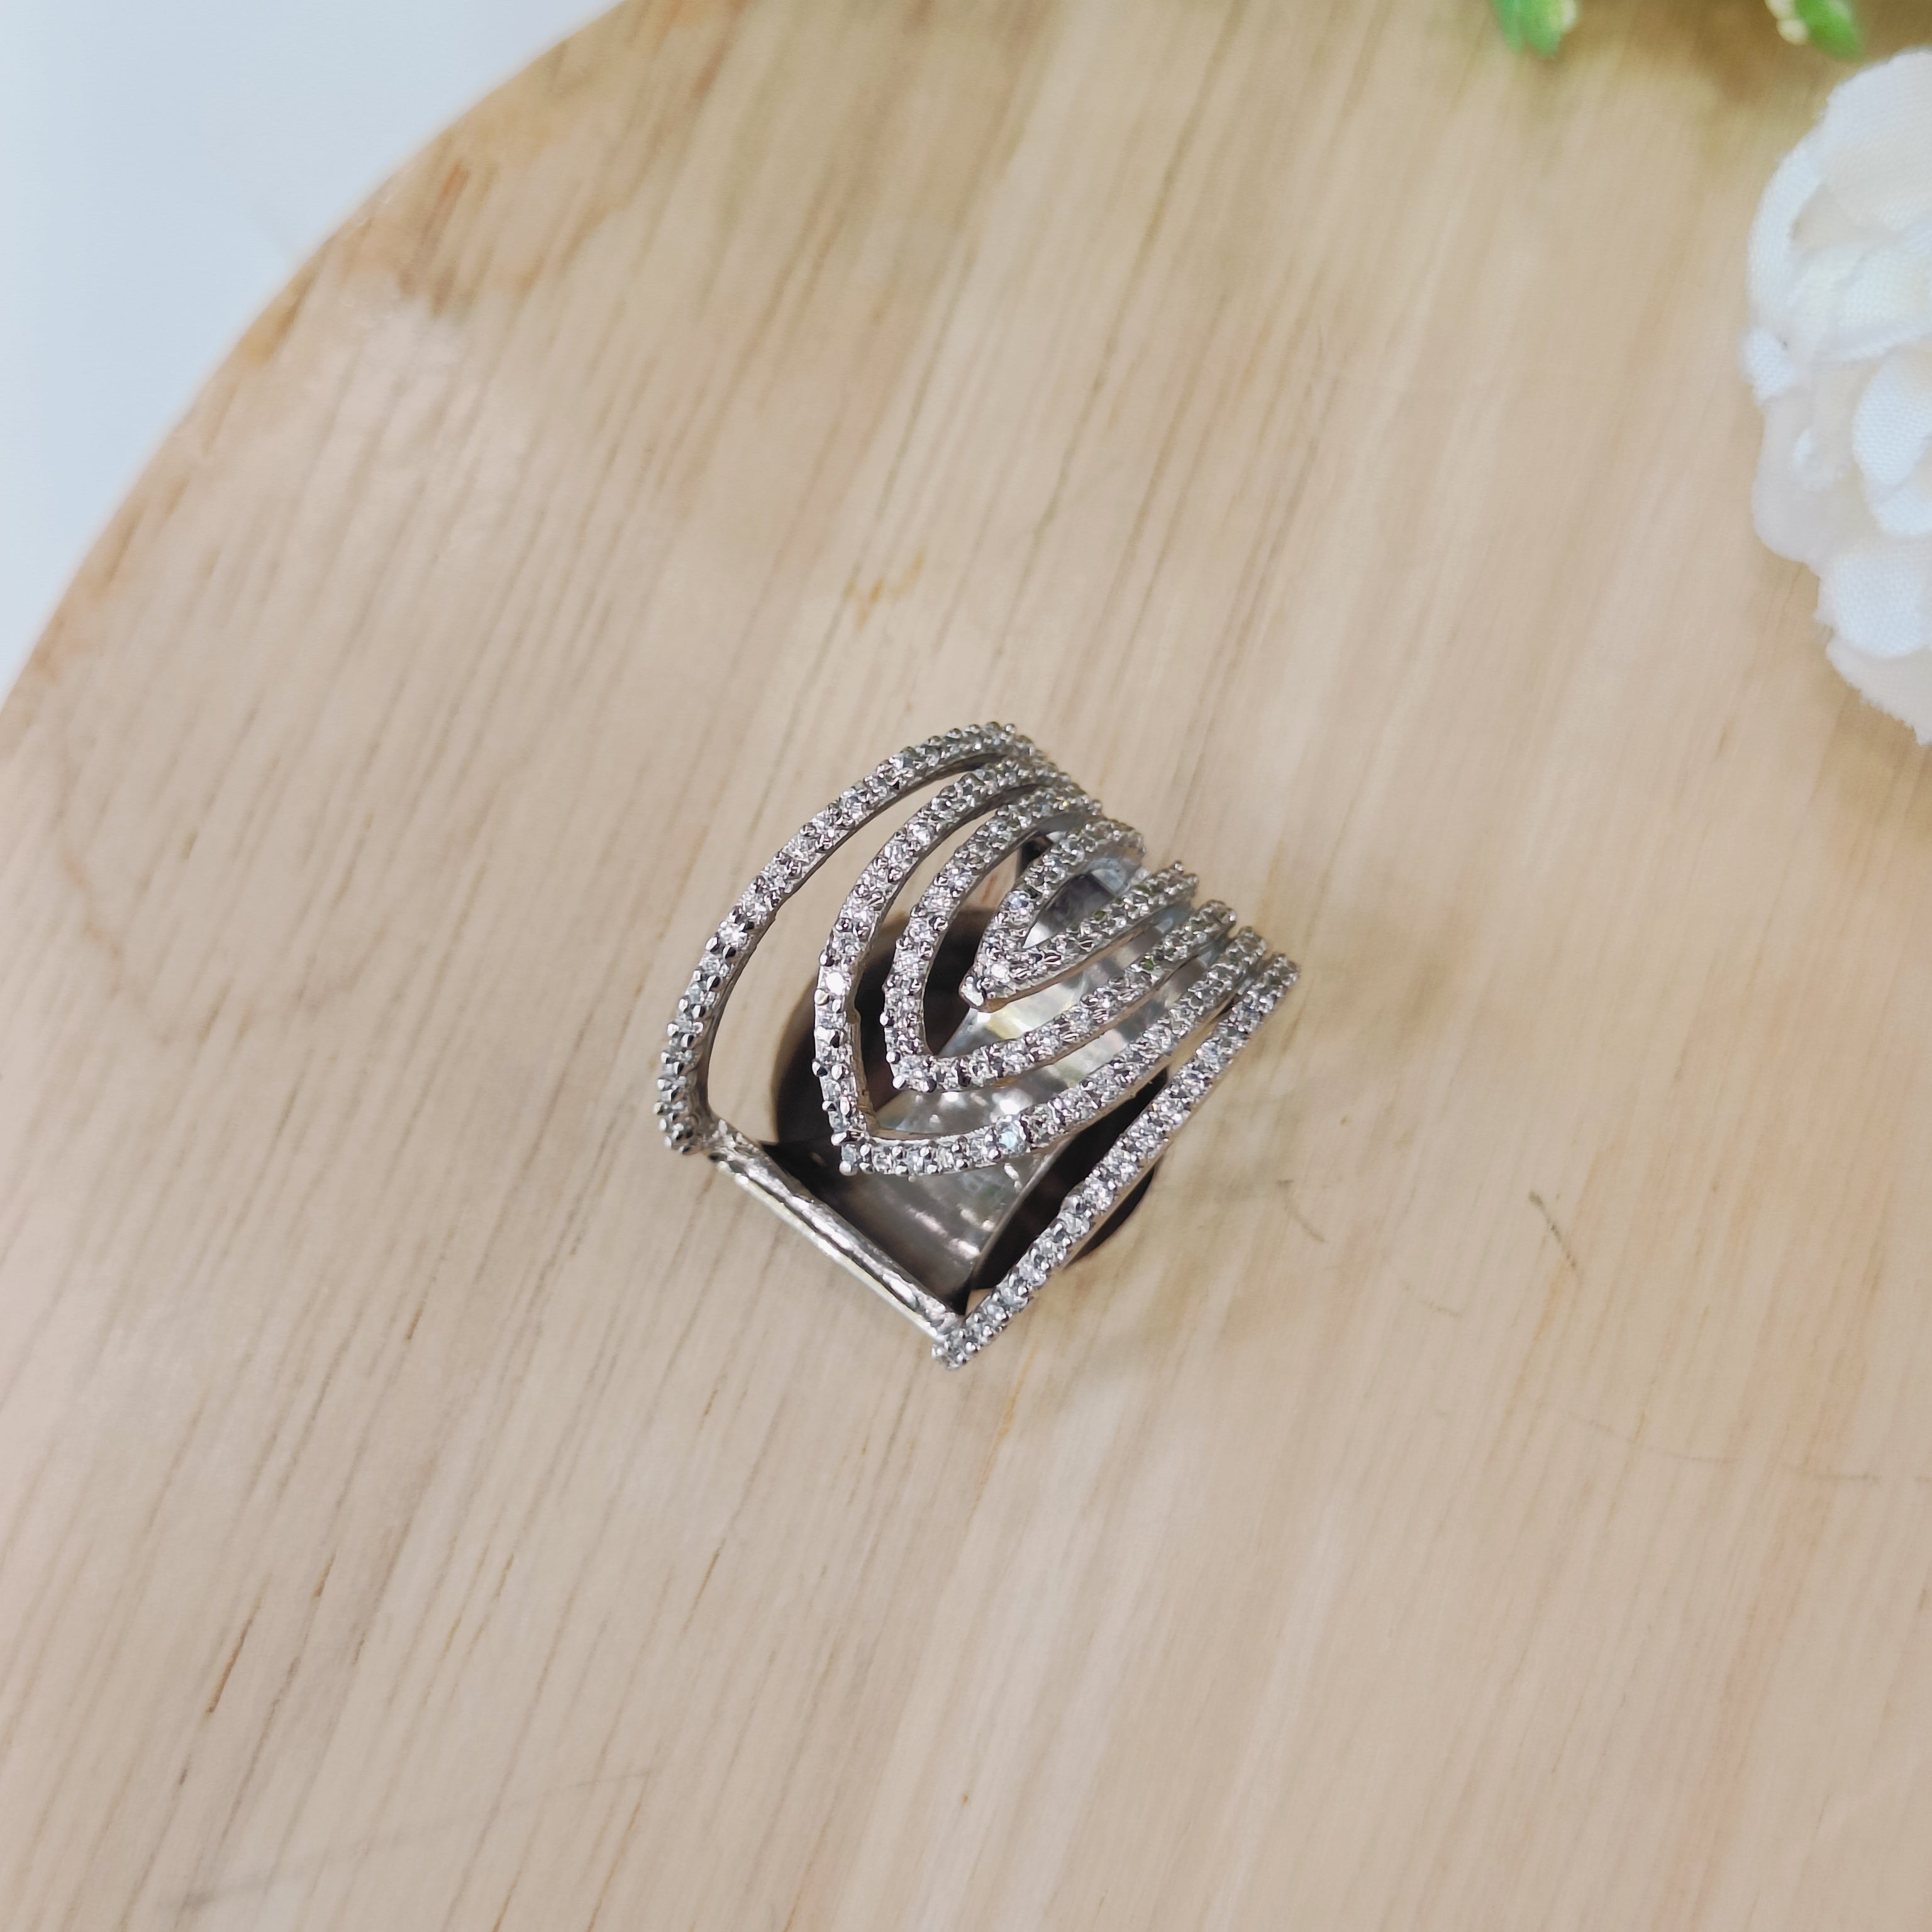 Vs sterling silver cocktail ring 178